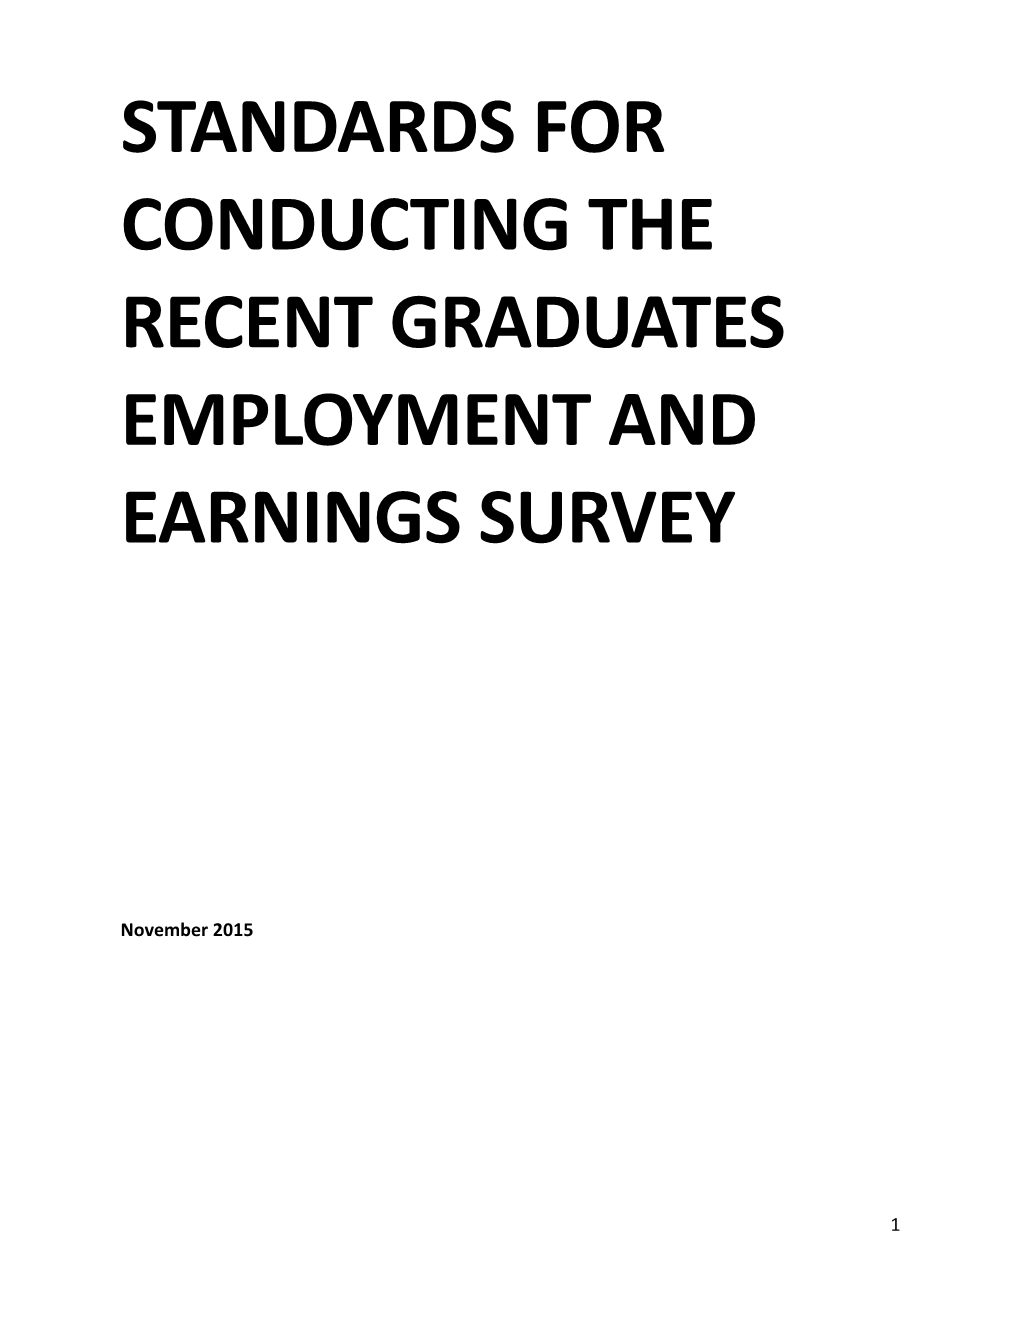 Standards for Conducting the Recent Graduates Employment and Earnings Survey